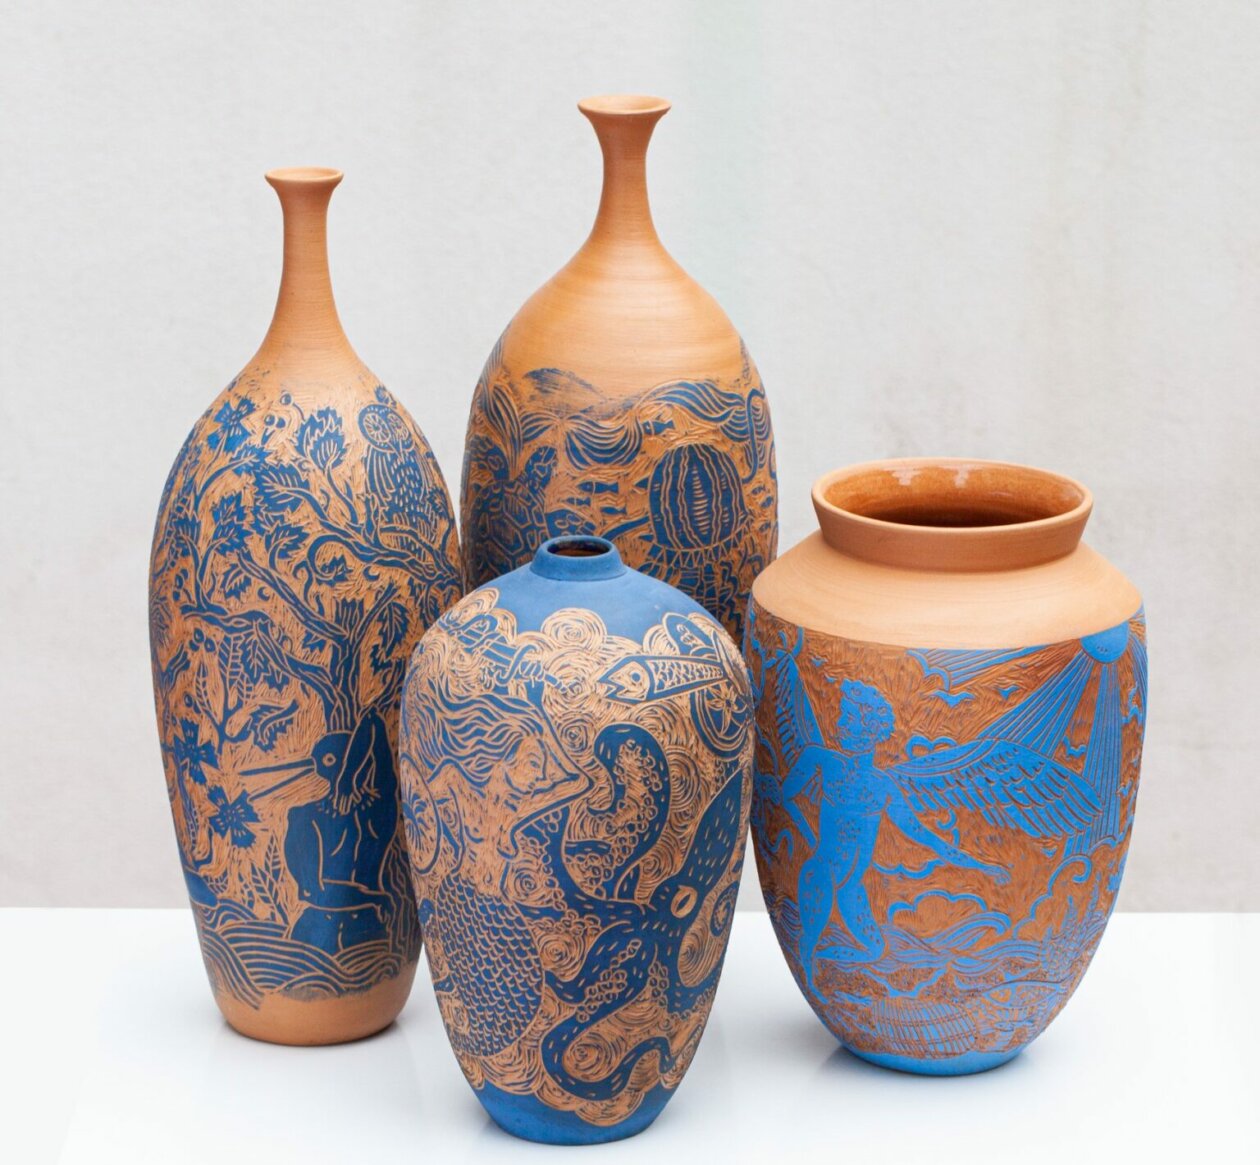 Illustred Ceramic Vessels And Tiles By Clara Holt 15